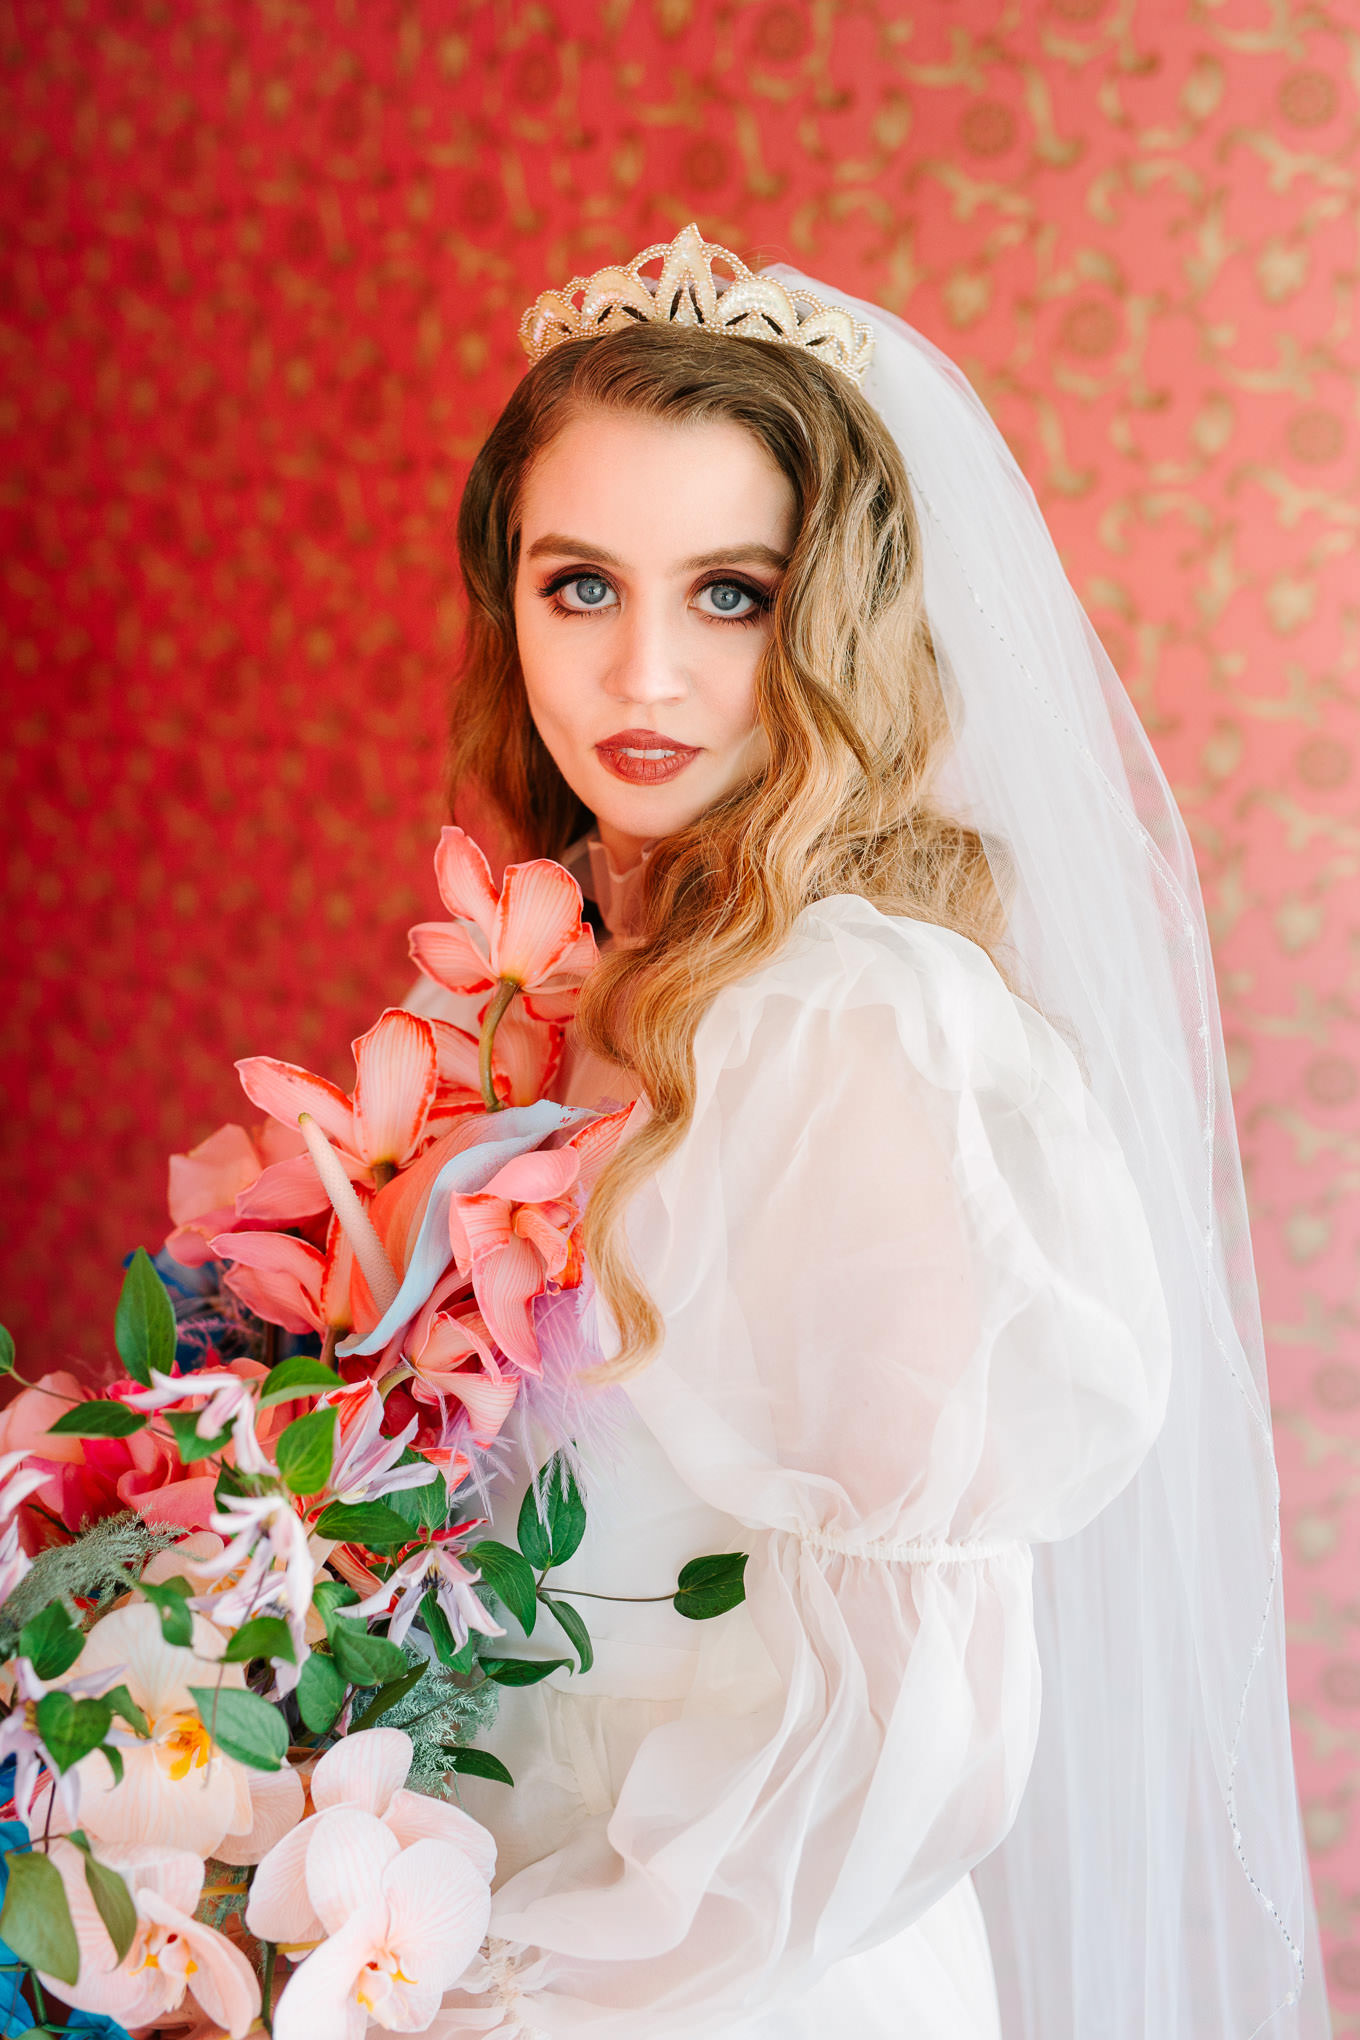 Allison Harvard bridal portrait at the Madonna Inn | Colorful and quirky wedding at Higuera Ranch in San Luis Obispo | #sanluisobispowedding #californiawedding #higueraranch #madonnainn   Source: Mary Costa Photography | Los Angeles